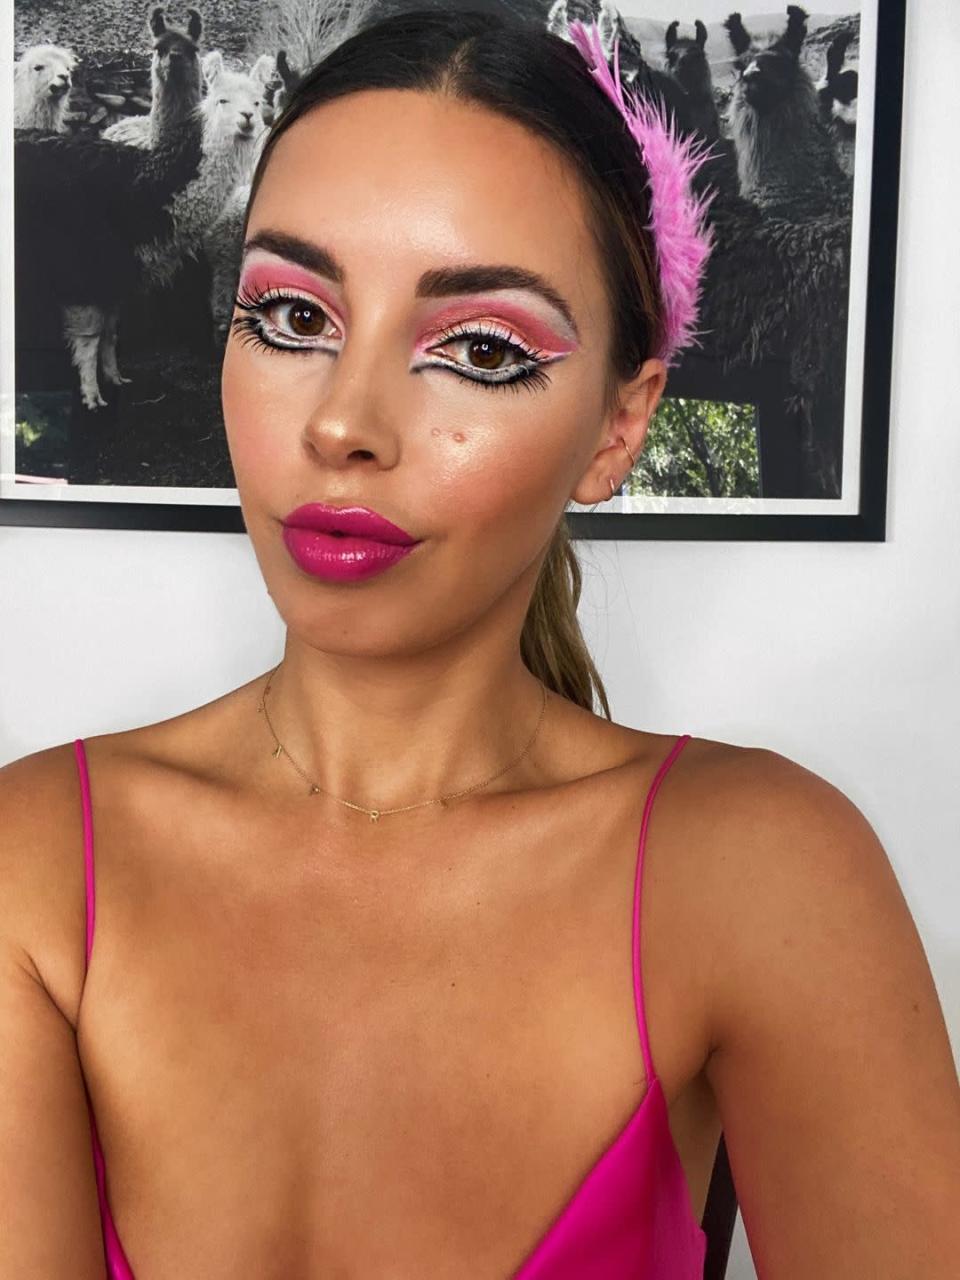 <p>Pretty in pink! You could create a full-on flamingo costume to pair with this rosy look created by <a href="https://www.instagram.com/sivanayla/" rel="nofollow noopener" target="_blank" data-ylk="slk:Sivan Ayla" class="link ">Sivan Ayla</a>, or just wear all pink and add in a few feathers for good measure. </p><p><strong>Get the tutorial at <a href="https://sivanayla.com/2019/10/23/pink-flamingo-makeup-tutorial/" rel="nofollow noopener" target="_blank" data-ylk="slk:Sivan Ayla" class="link ">Sivan Ayla</a>.</strong></p>